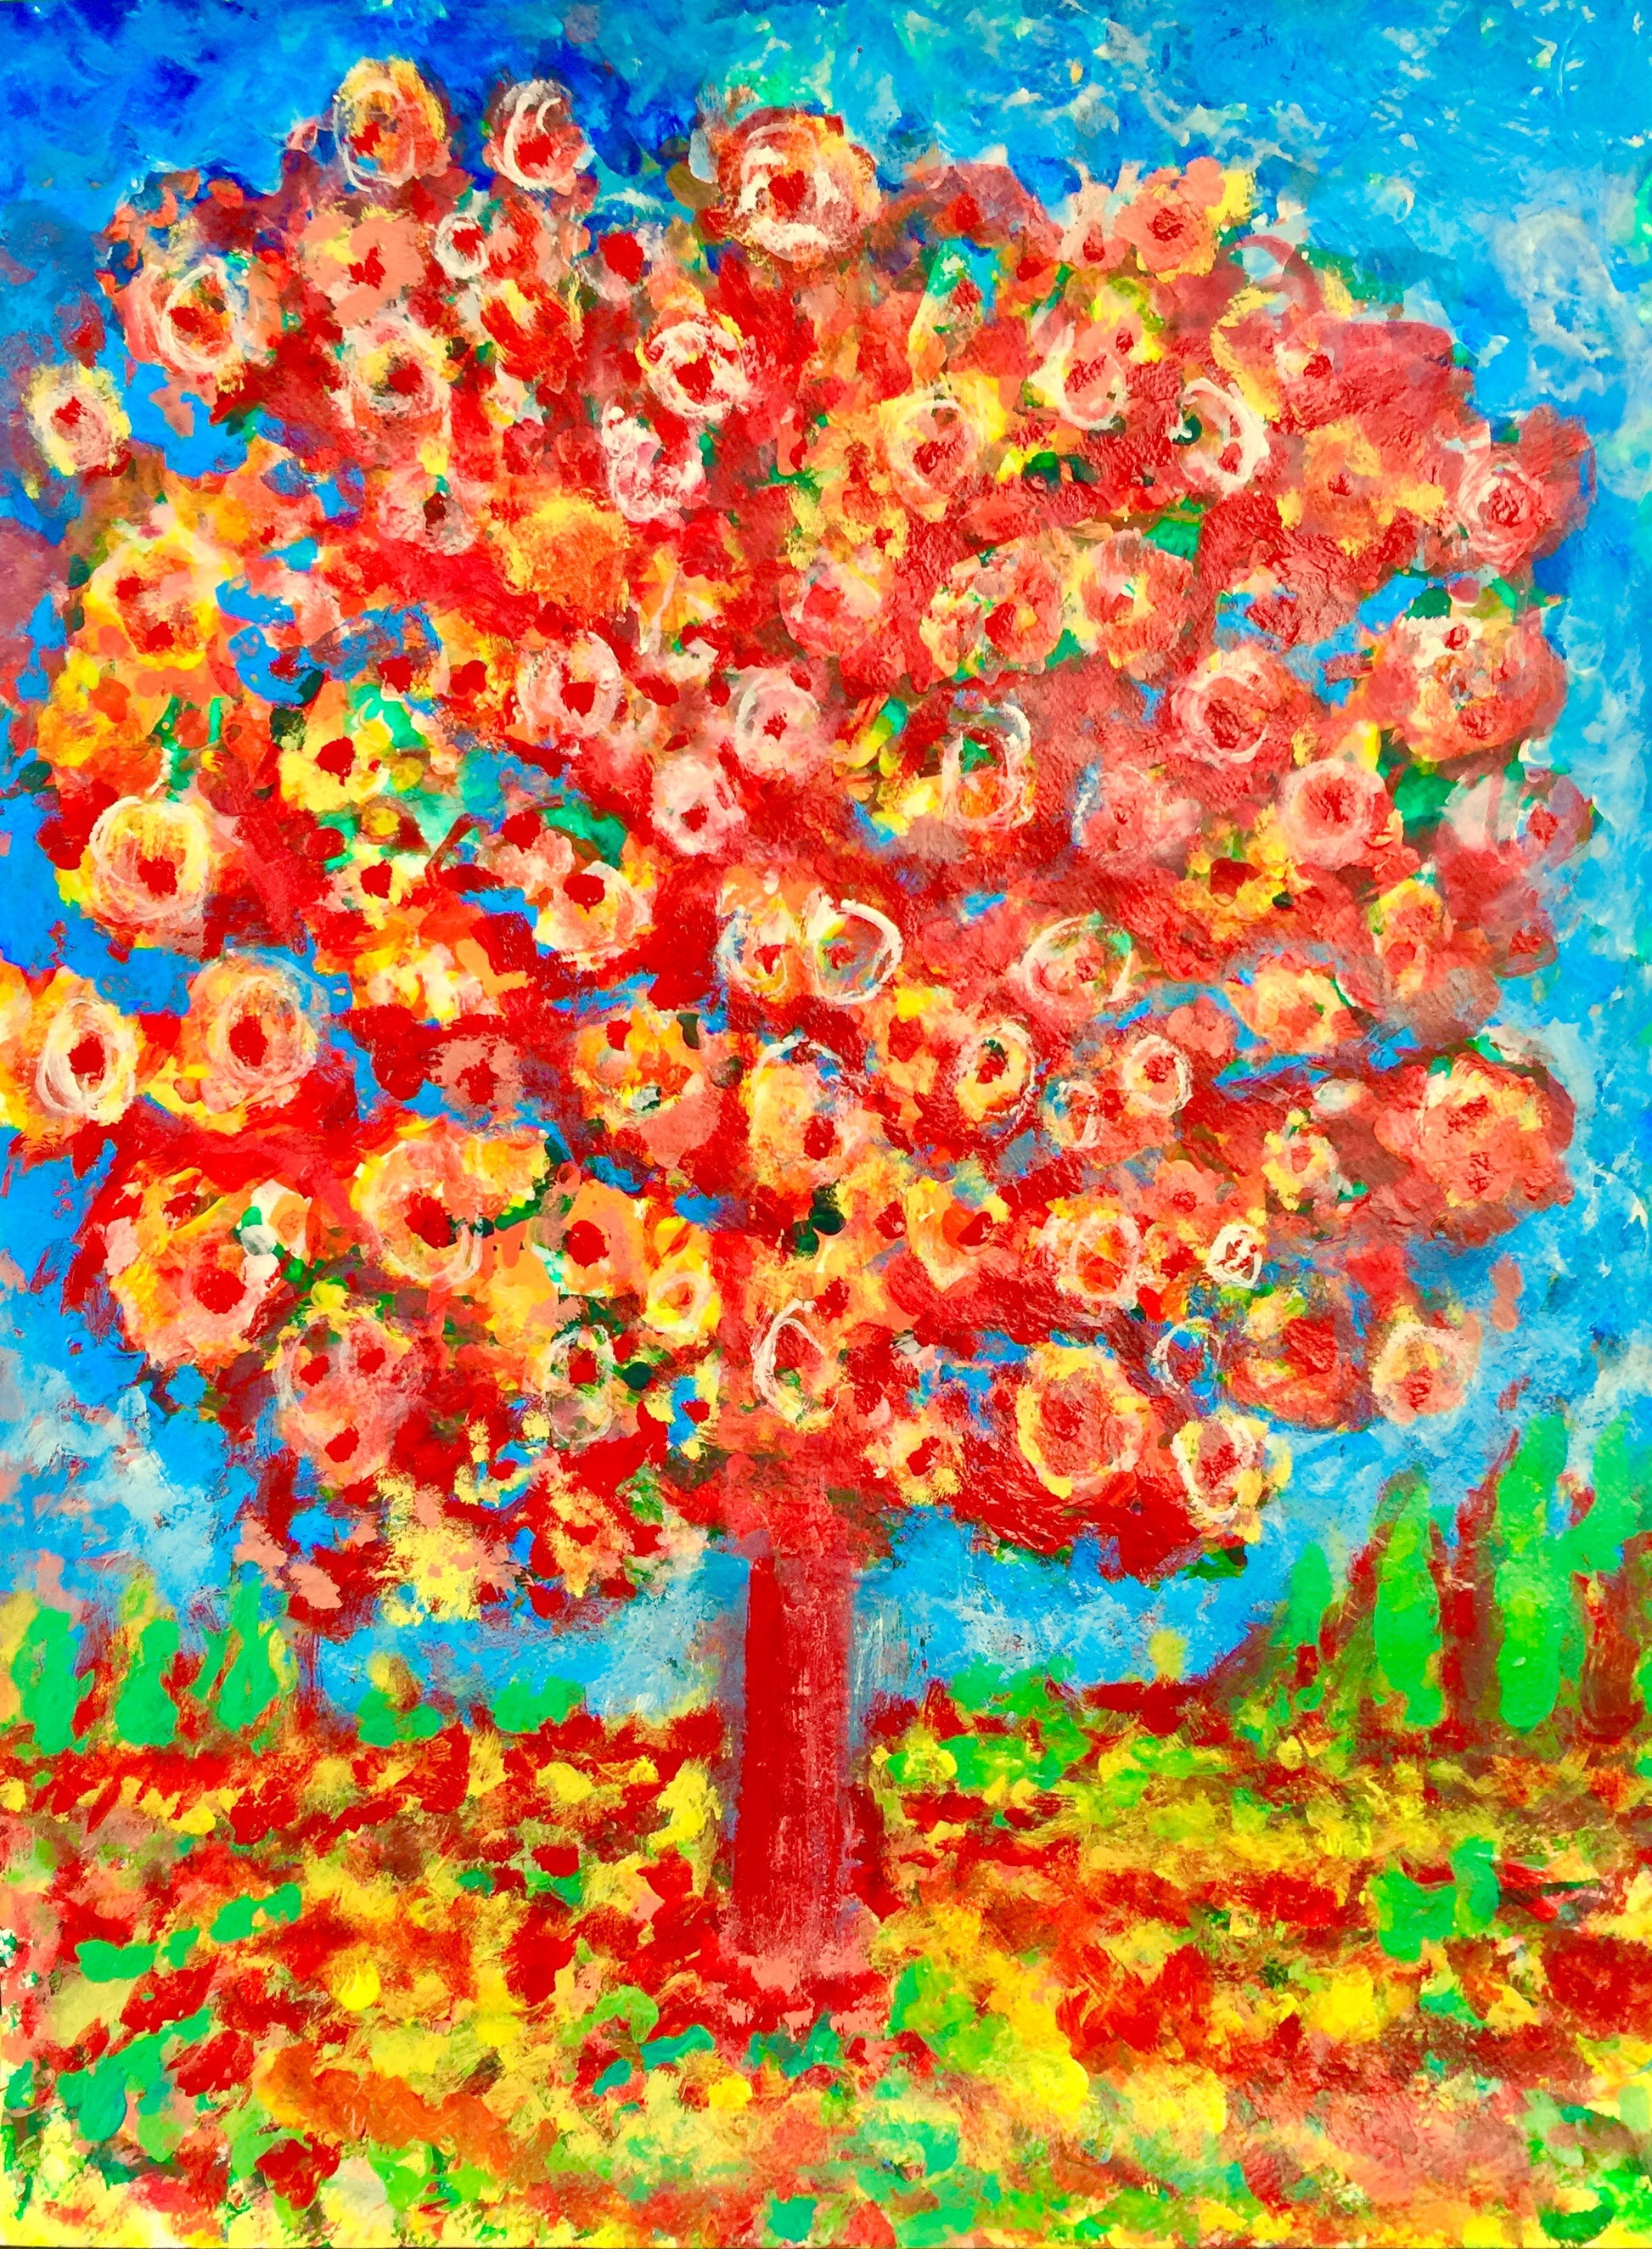 Since the beginning of COVID-19 Quarantine, I have started a series of “Live” paintings titled ”Rising Phoenix” . You know it is spring, when you see those gorgeous Cheery Blossoms on Trees.  This is an Acrylic on  Paper painting by artist Shahla Rahimi Reynolds.  It is  24” H x 21” W.